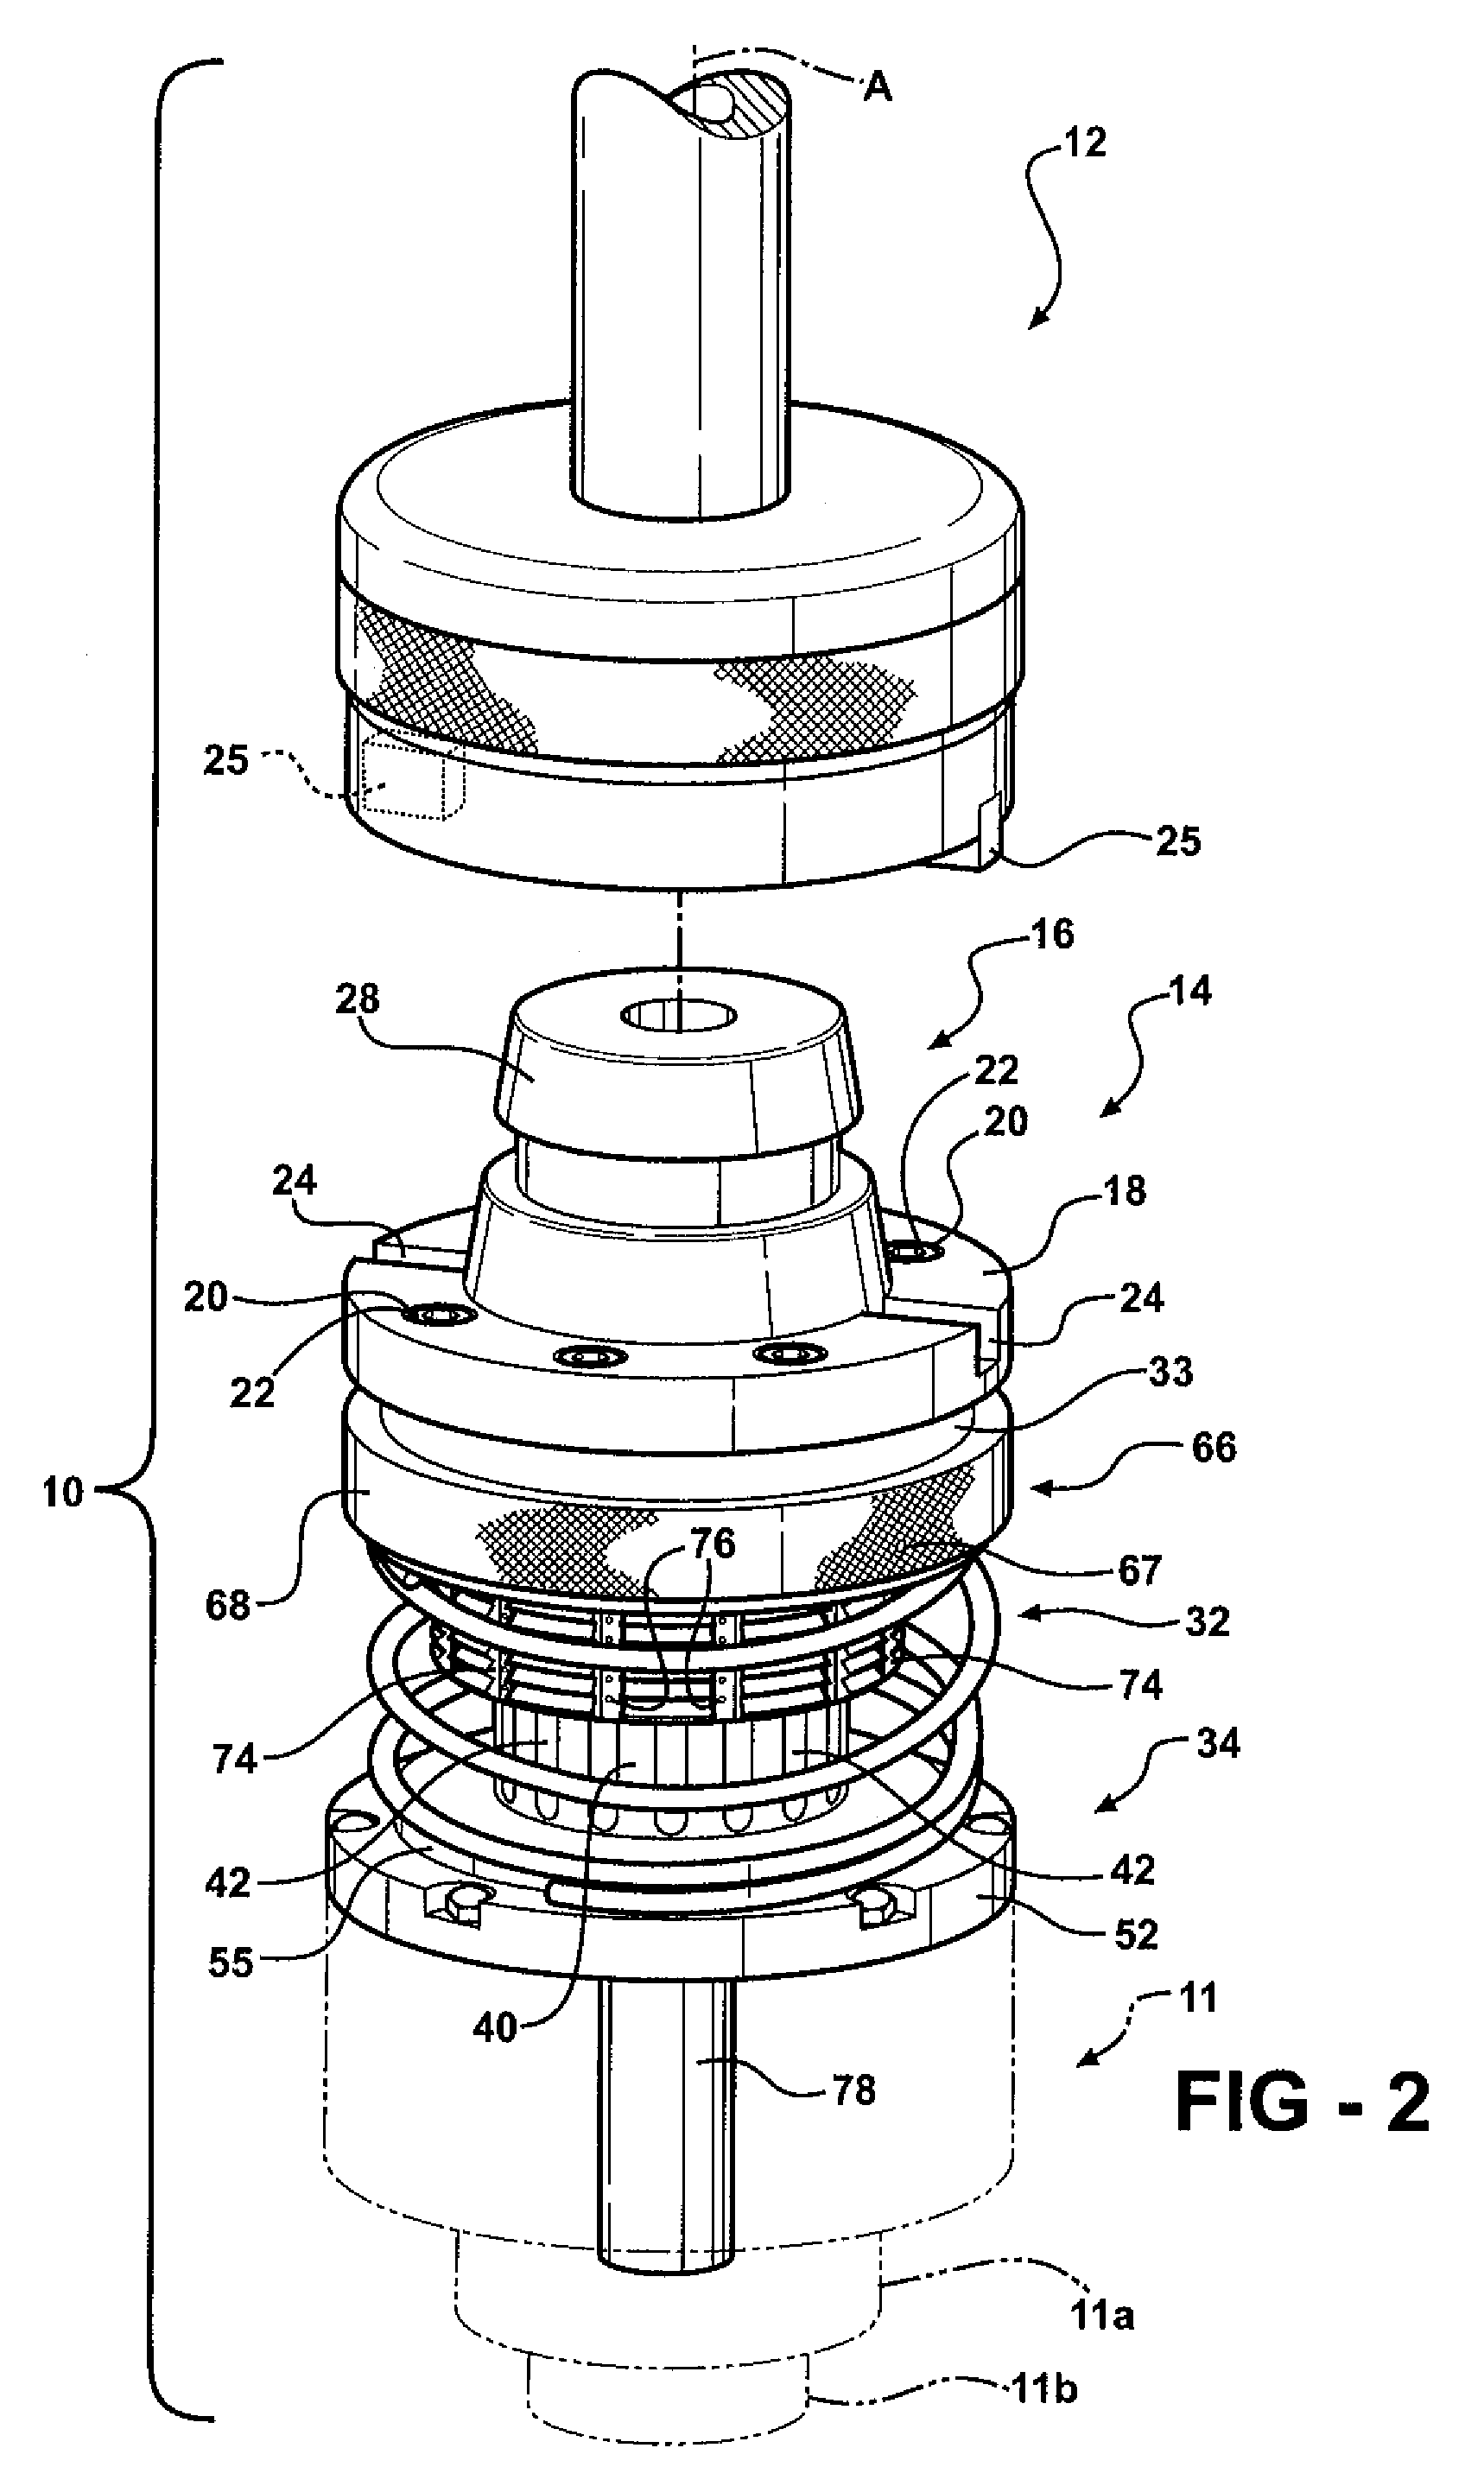 Capping device with bearing mechanism having a plurality of bearing members between a drive member and a capper body